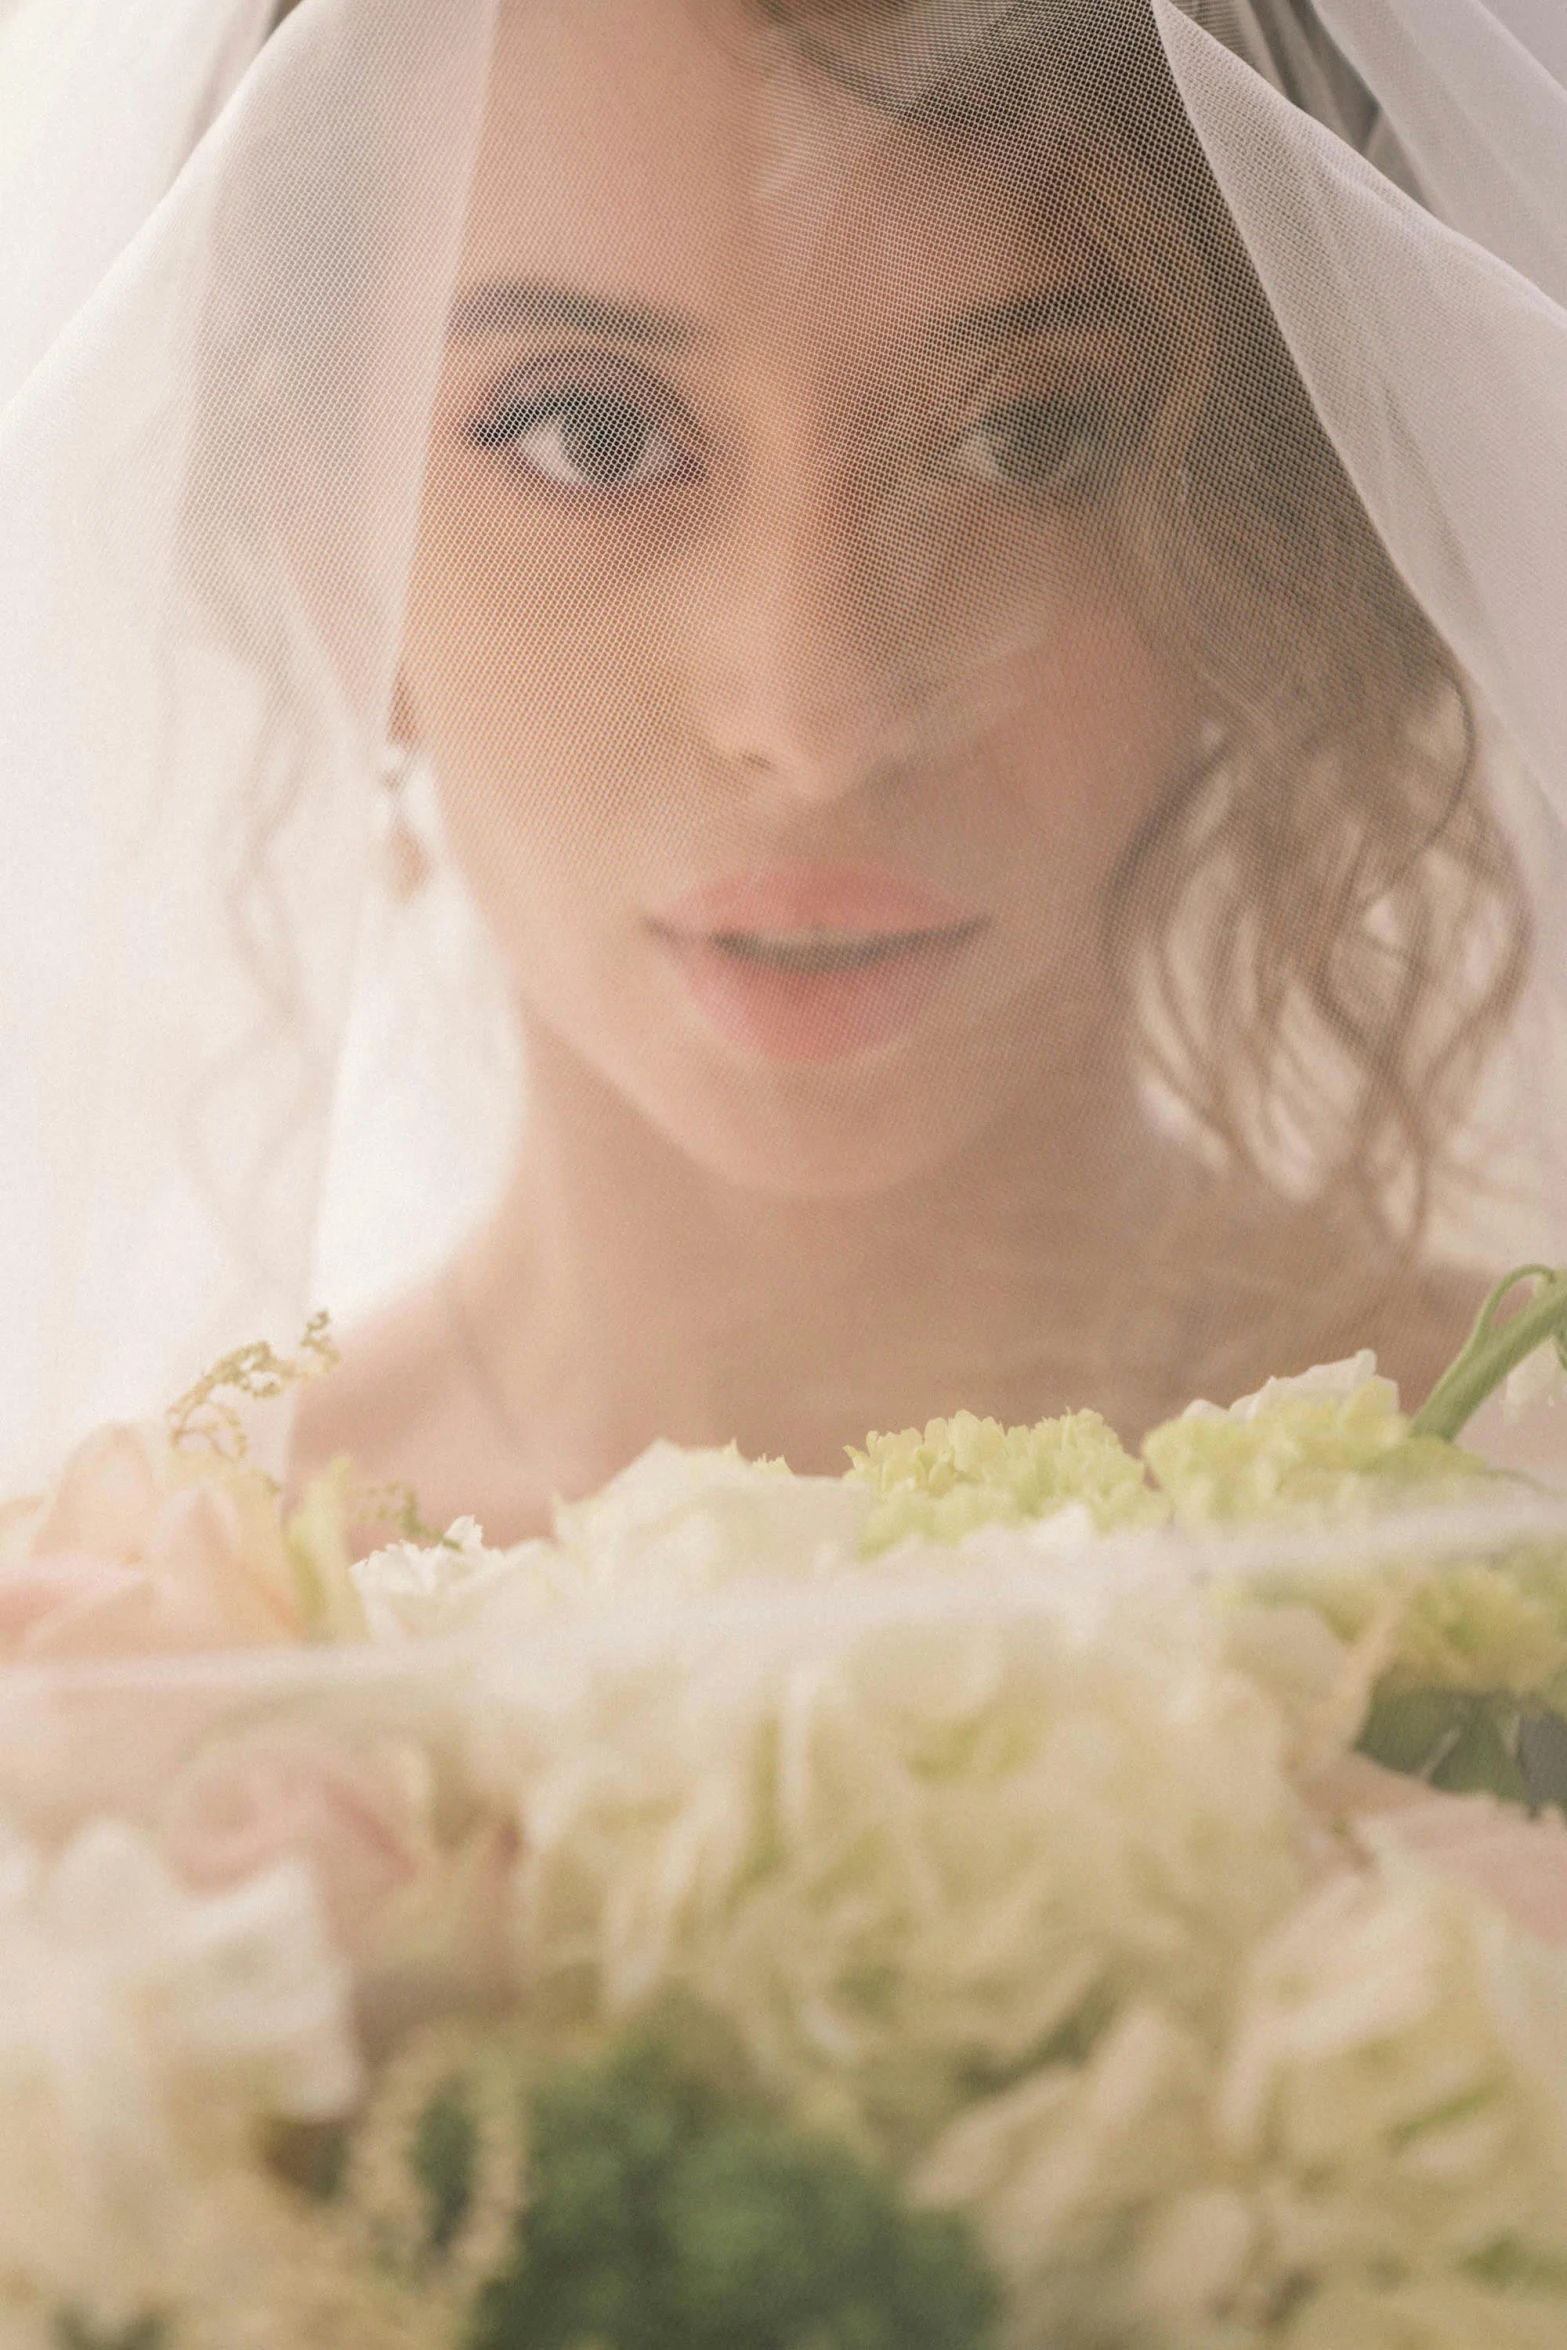 the bride wearing a veil is looking down at her wedding bouquet